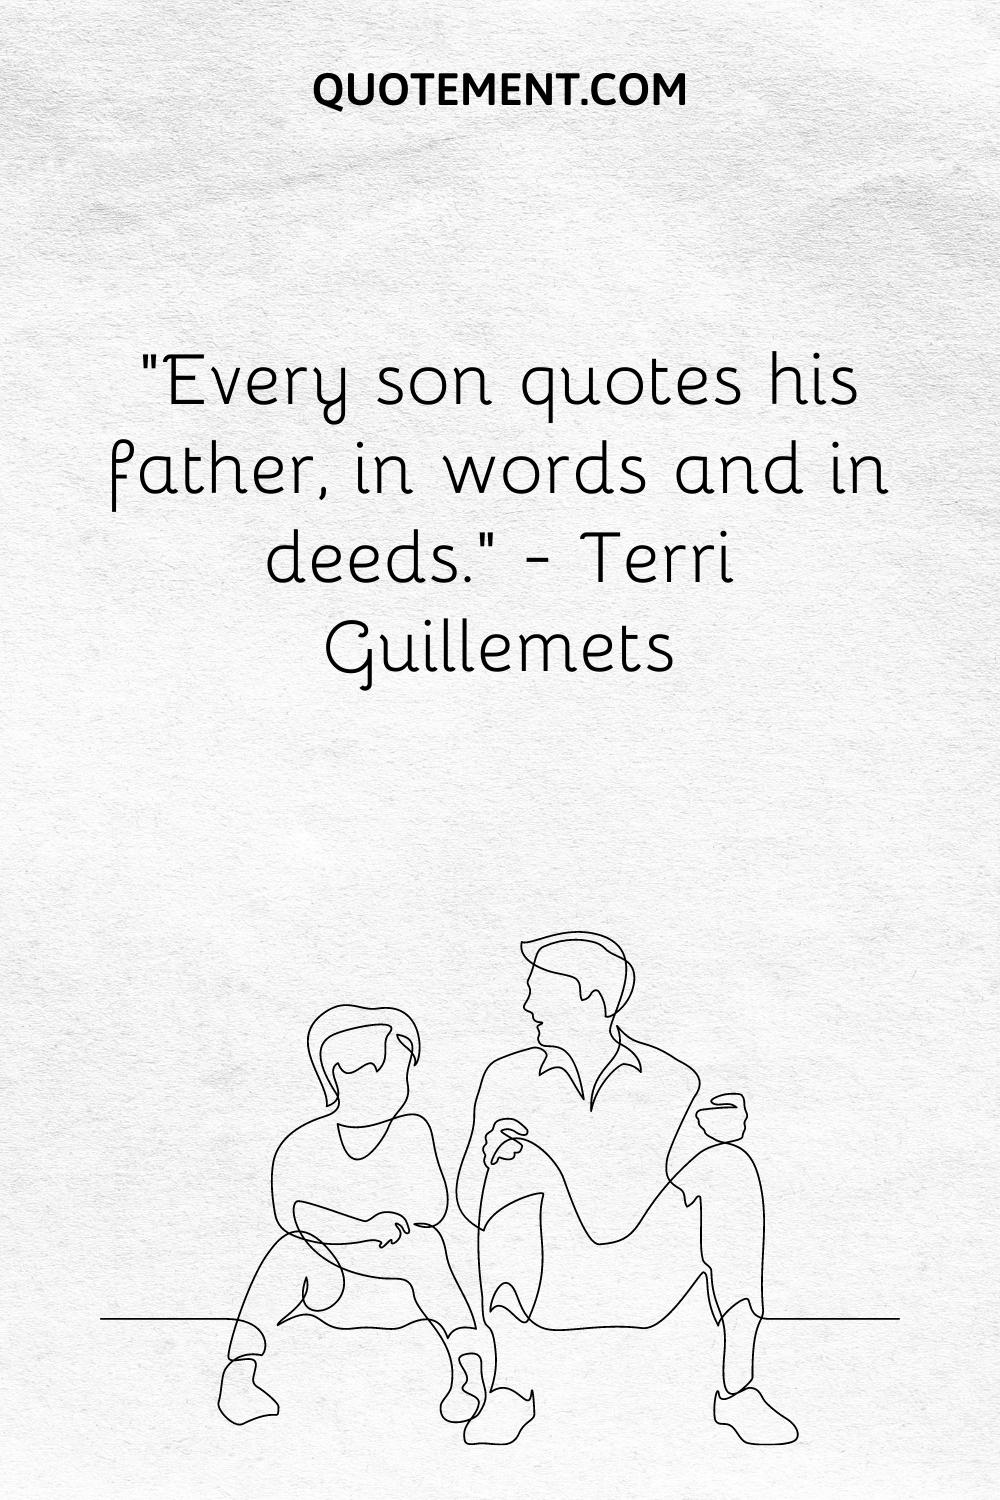 “Every son quotes his father, in words and in deeds.” — Terri Guillemets